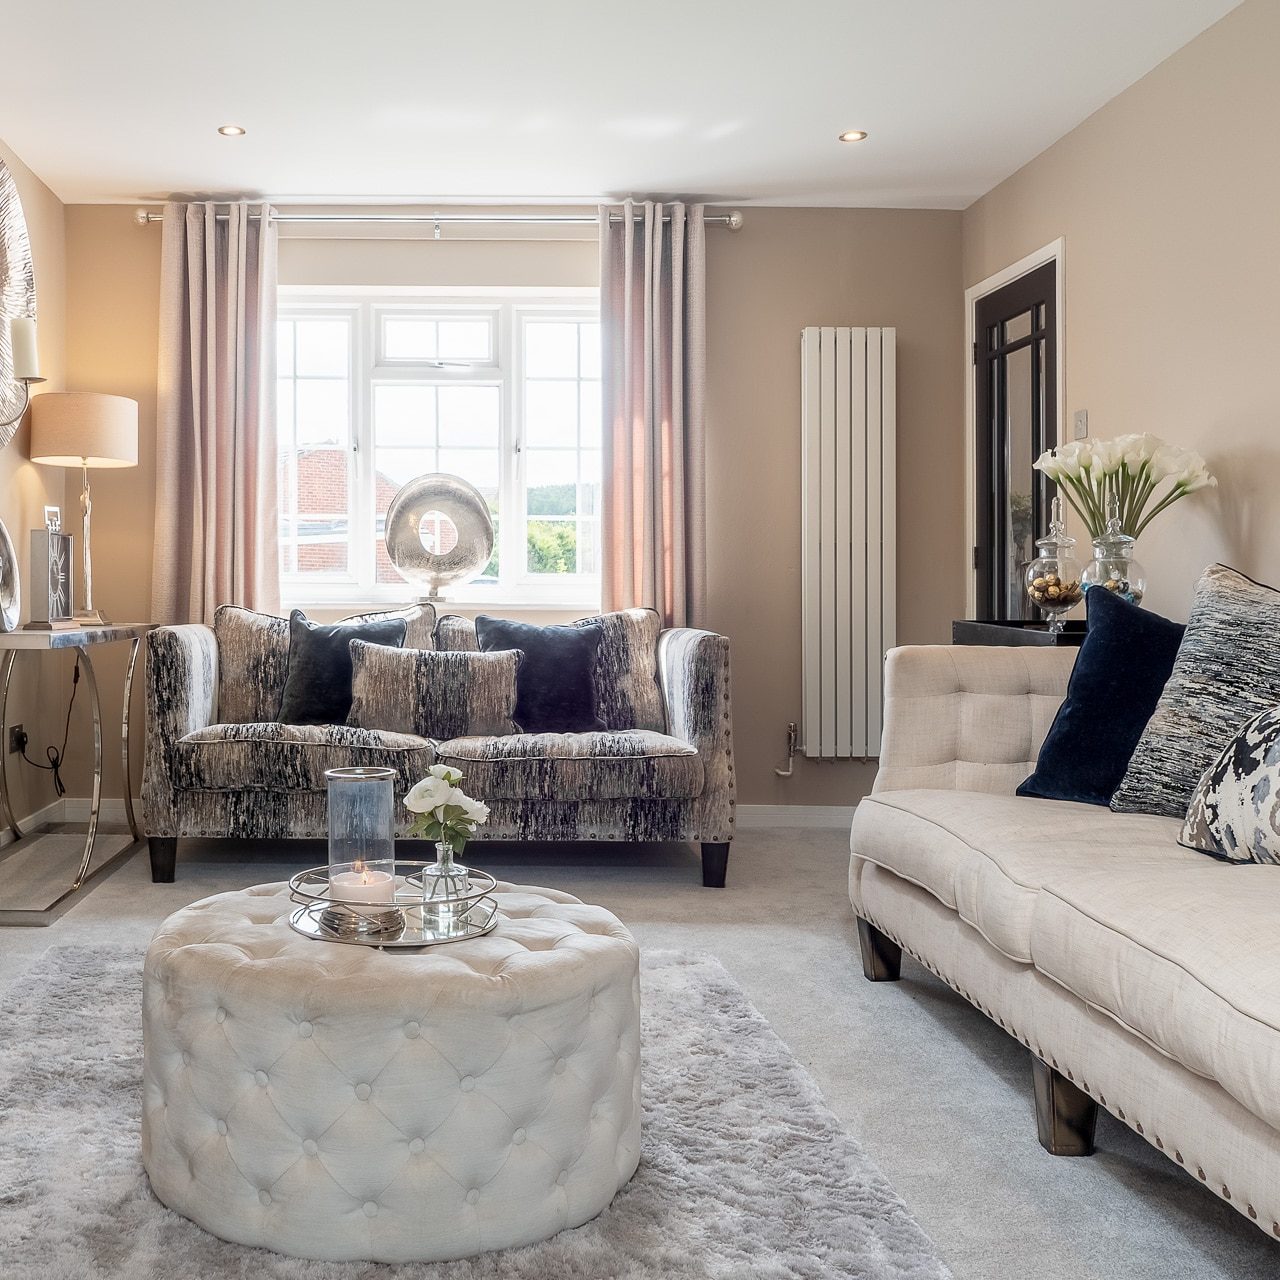 Eight decorating ideas to steal from the UK's poshest showhome